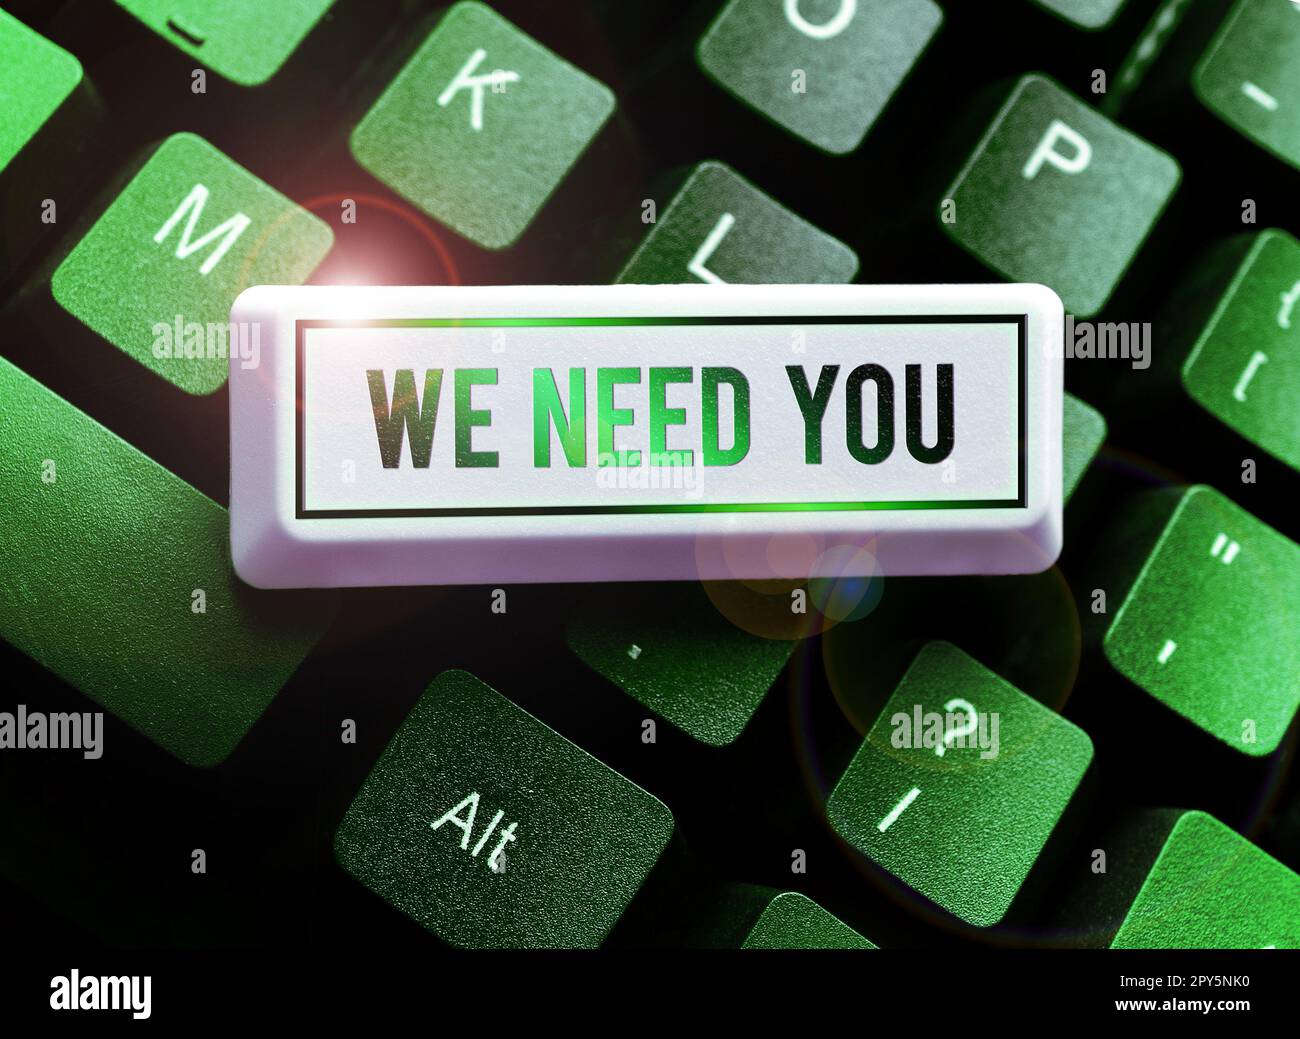 Sign displaying We Need You. Business overview Company wants to hire Vacancy Looking for talents Job employment Stock Photo